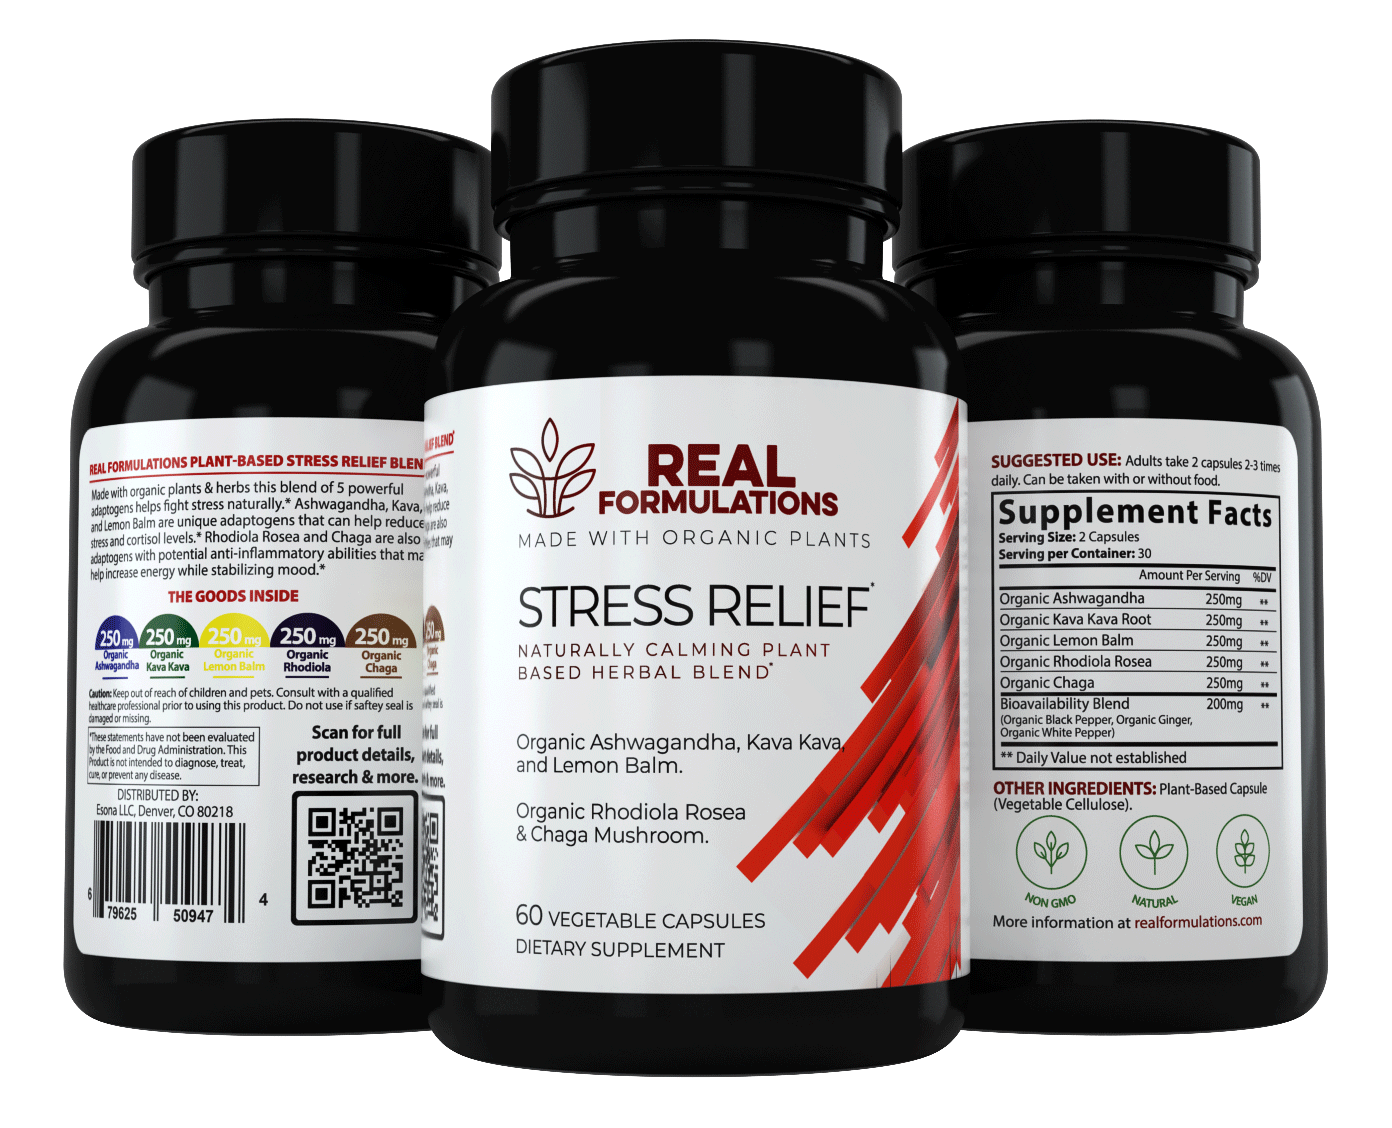 Real Formulations Stress Relief Supplement.* Made from Organic Ashwagandha, Kava Kava Root and Lemon Balm. It also is made with Organic Rhodiola Rosea and Chaga Mushroom.